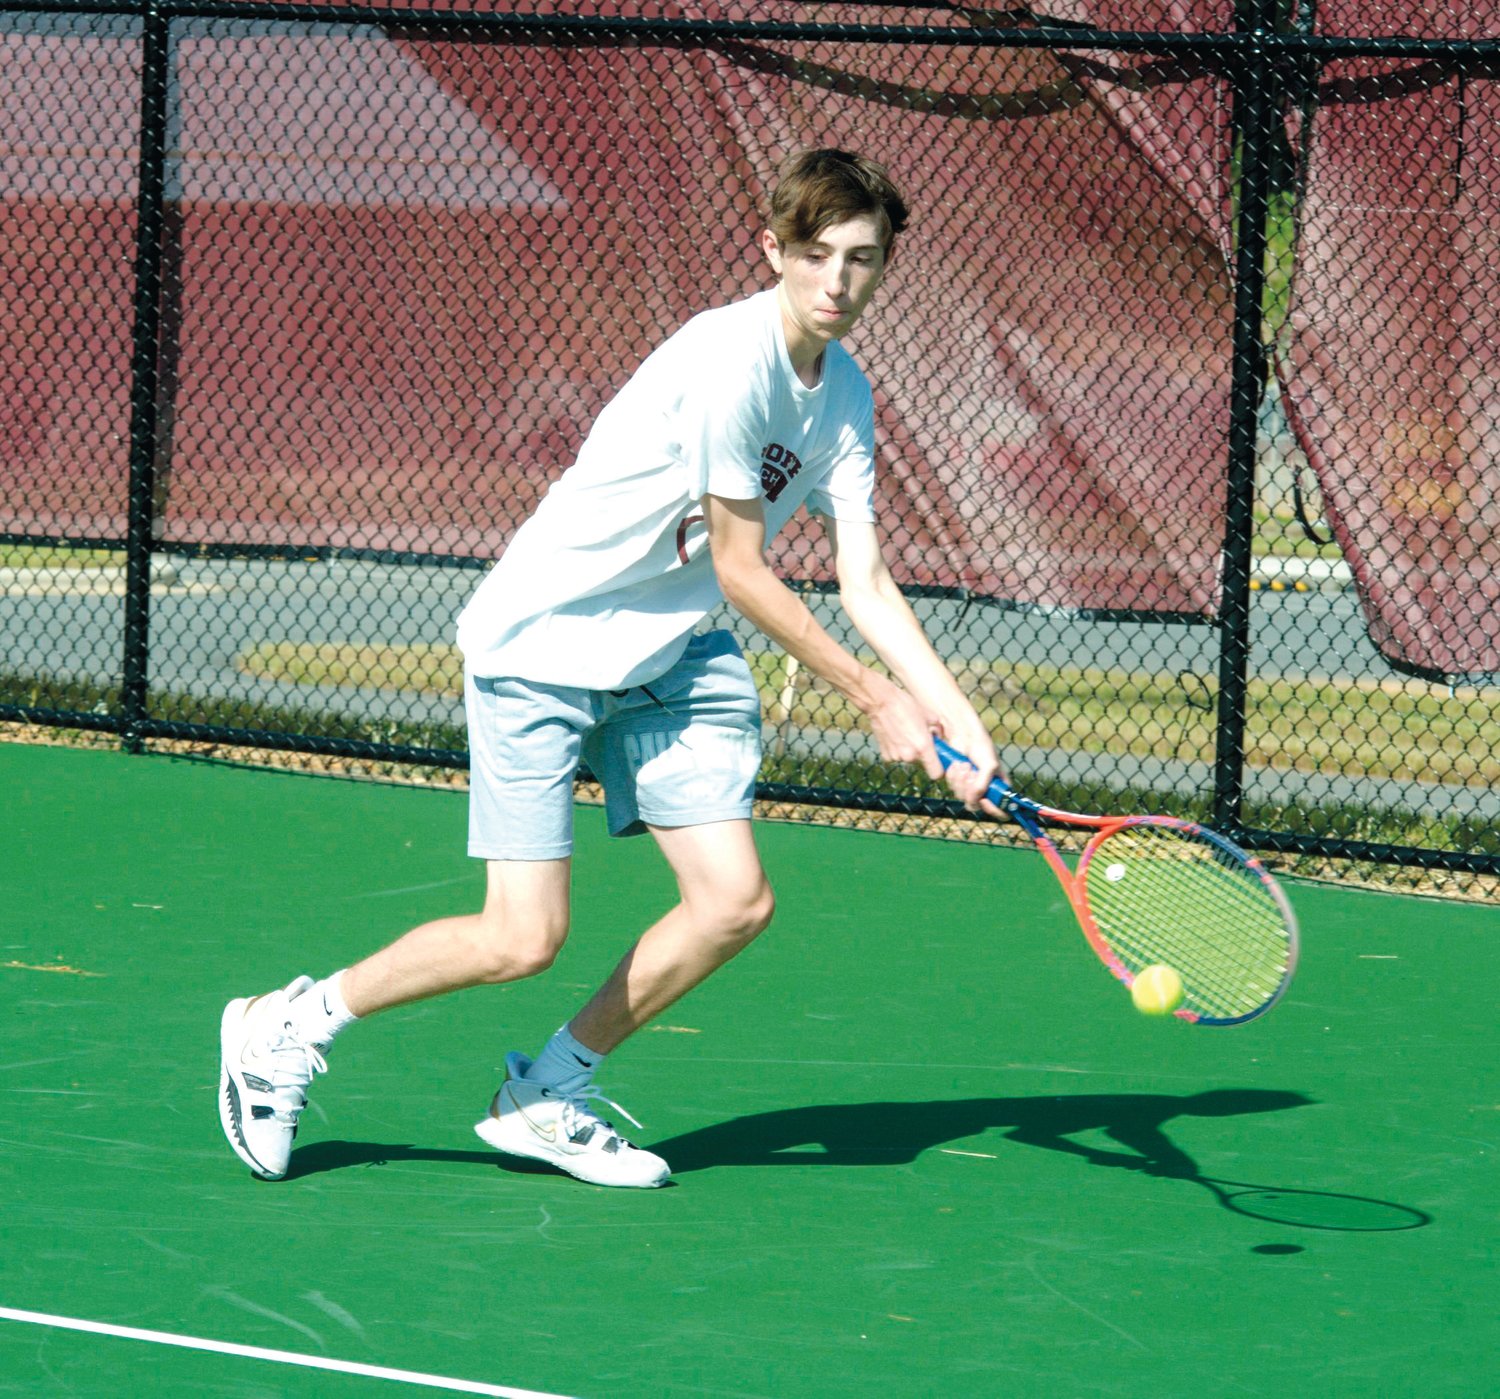 Seaforth sophomore Logan Ching backhands a lob over the net from his singles opponent from Raleigh Charter, sophomore Marshall McClure, who he lost to (1-6, 2-6), in the Hawks' first-round upset to the Phoenix, 8-1. Despite the loss, Seaforth Head Coach PJ Petrides gave Ching the metaphorical game ball for the match.